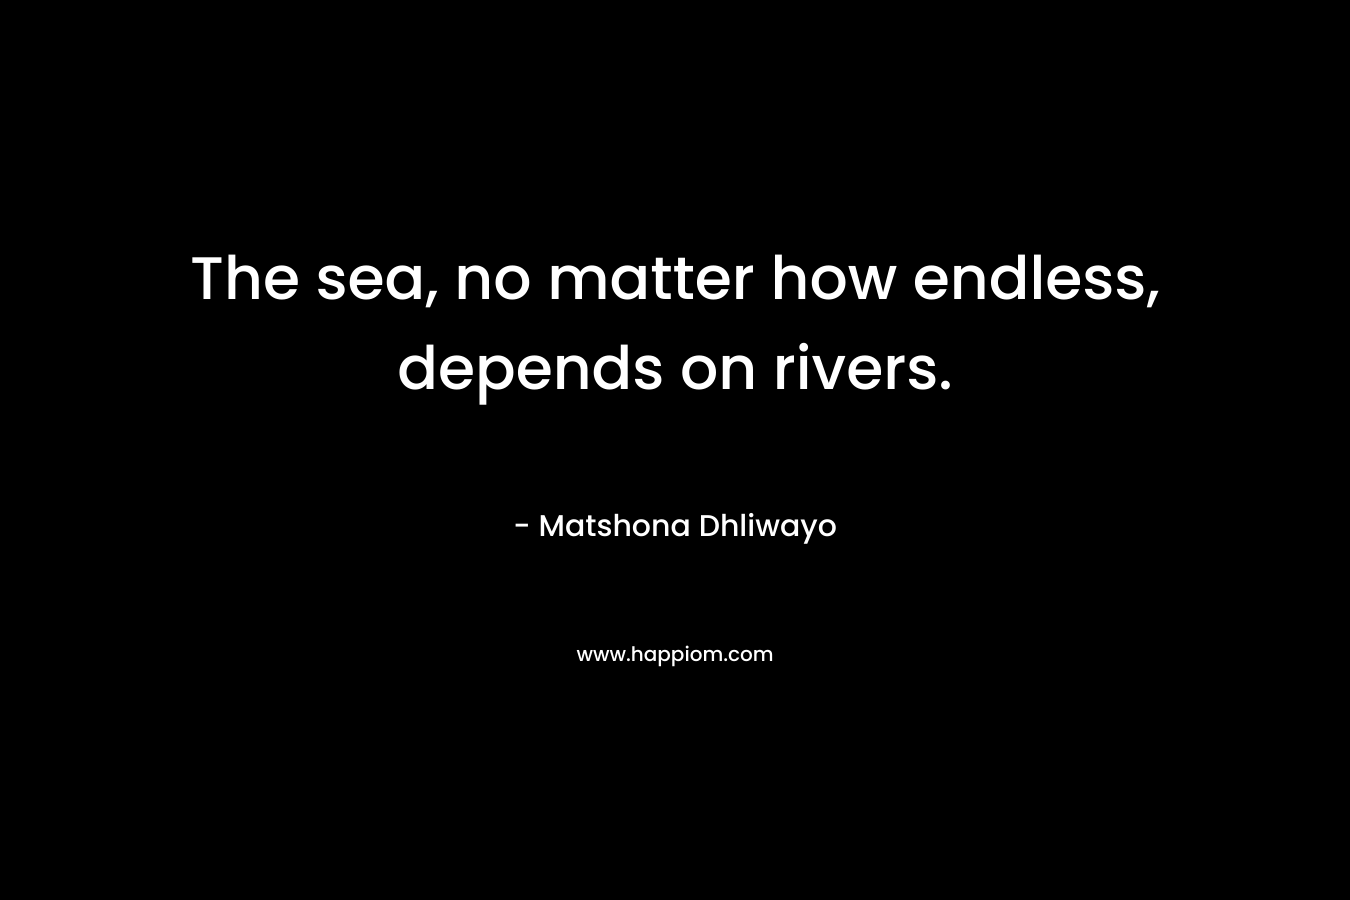 The sea, no matter how endless, depends on rivers.